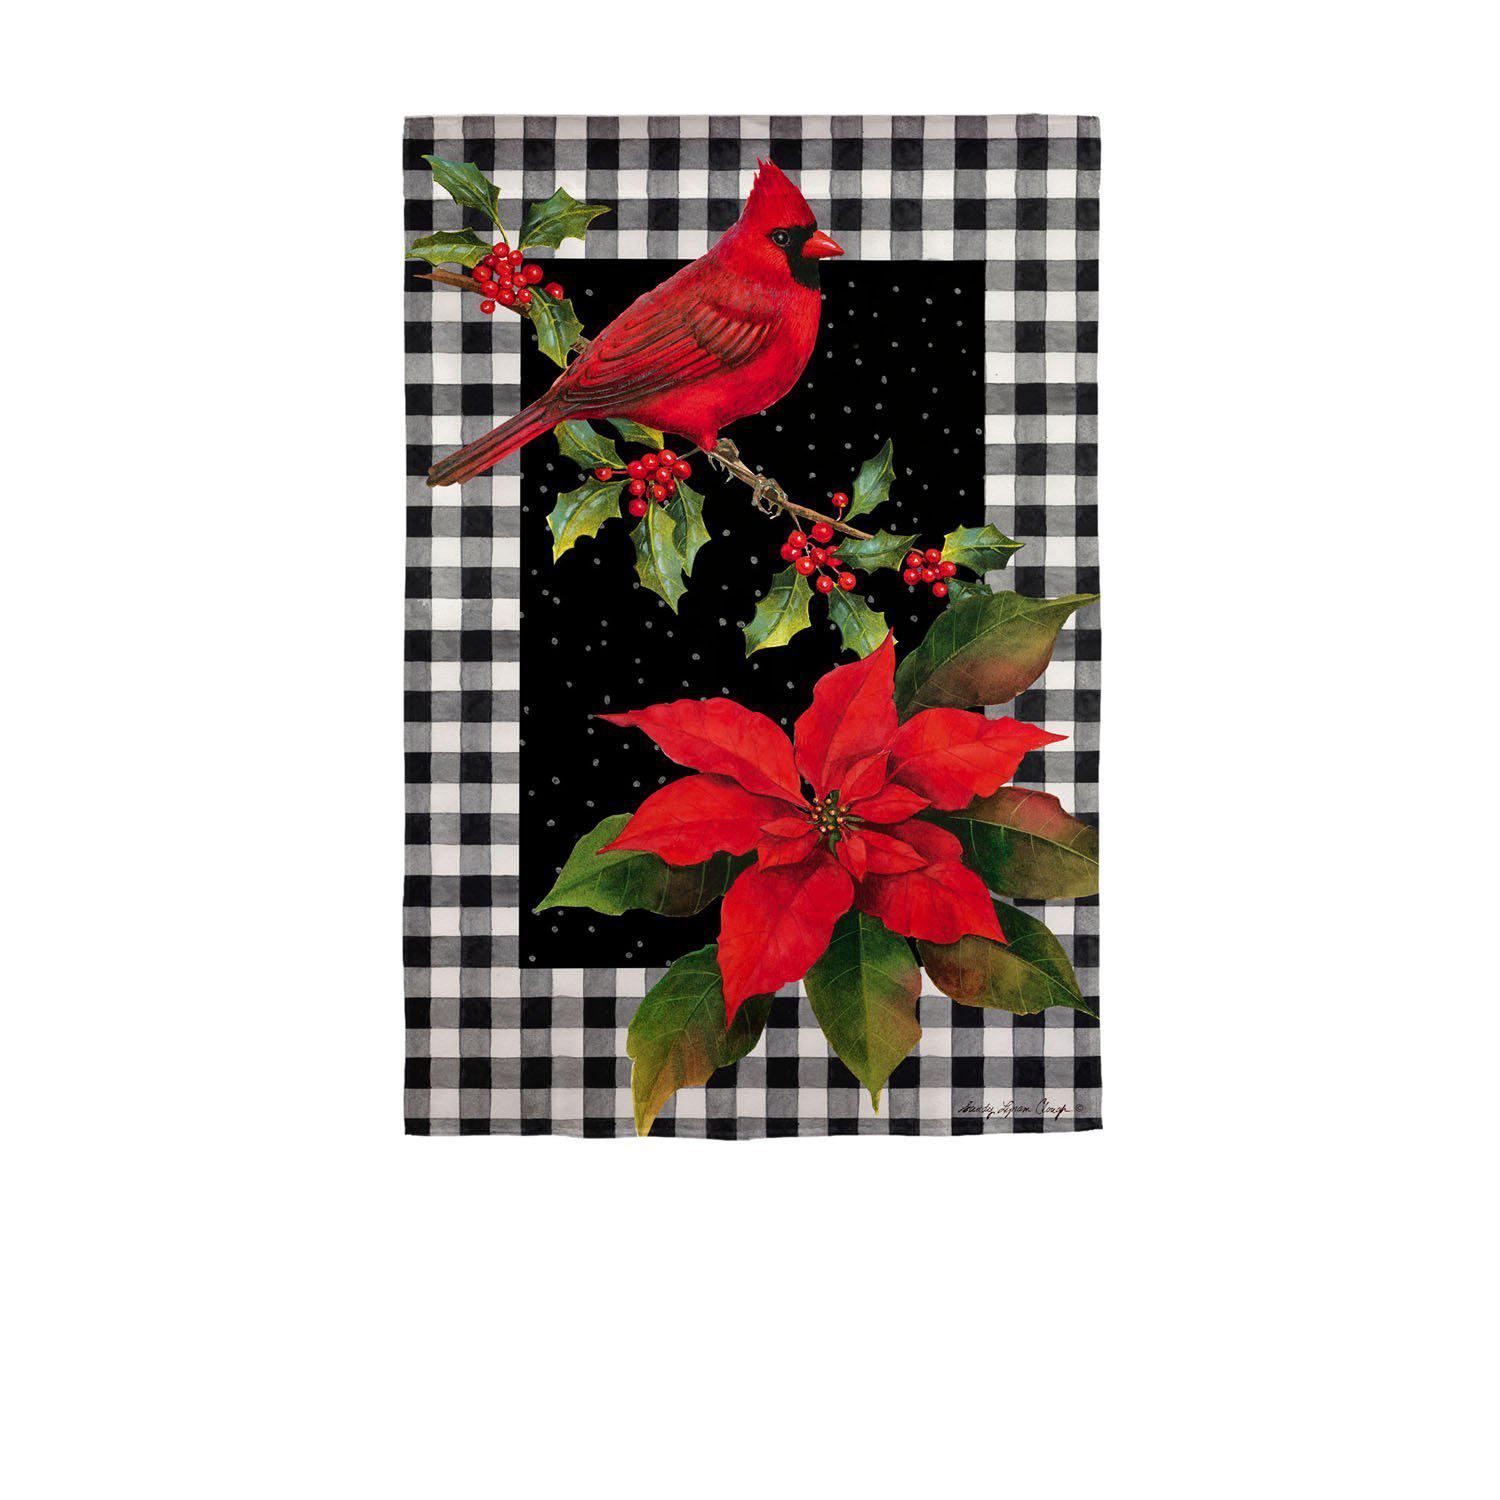 The Cardinal & Holly house banner features a bright red cardinal sitting on a holly branch with a poinsettia in the lower corner and a black & white checked background.